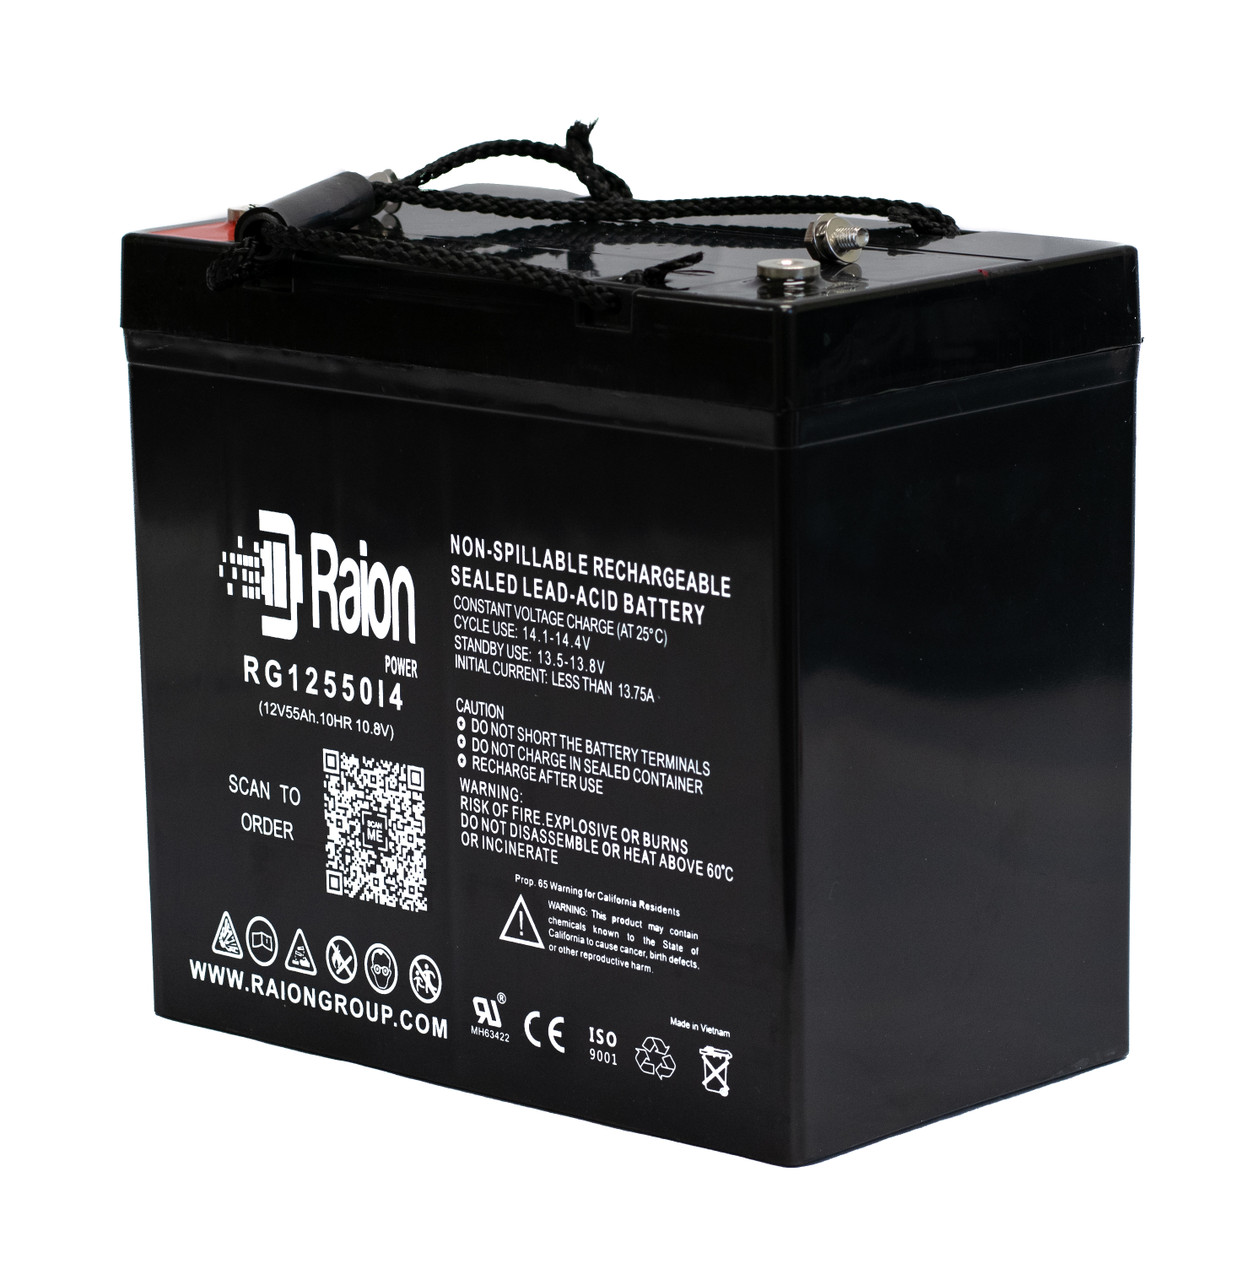 Raion Power Replacement 12V 55Ah Battery for Duracell DURA12-55C/FR - 1 Pack